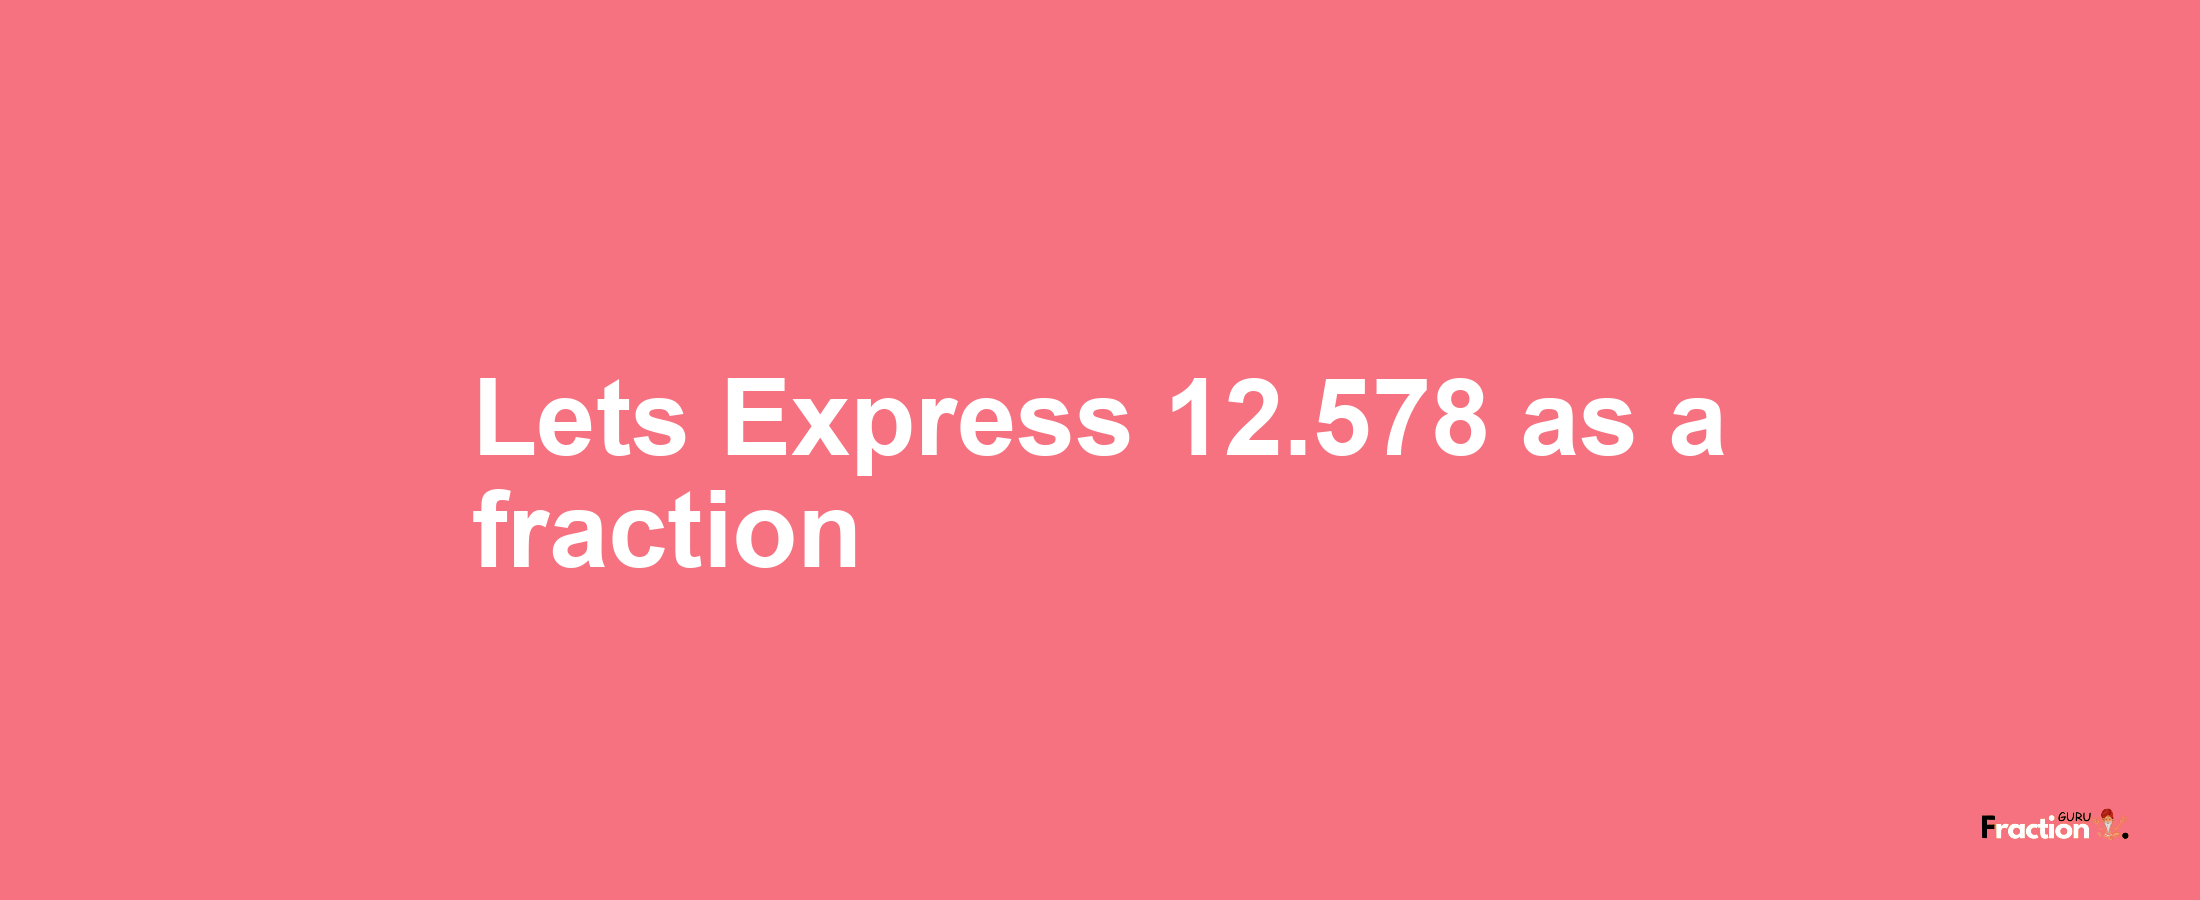 Lets Express 12.578 as afraction